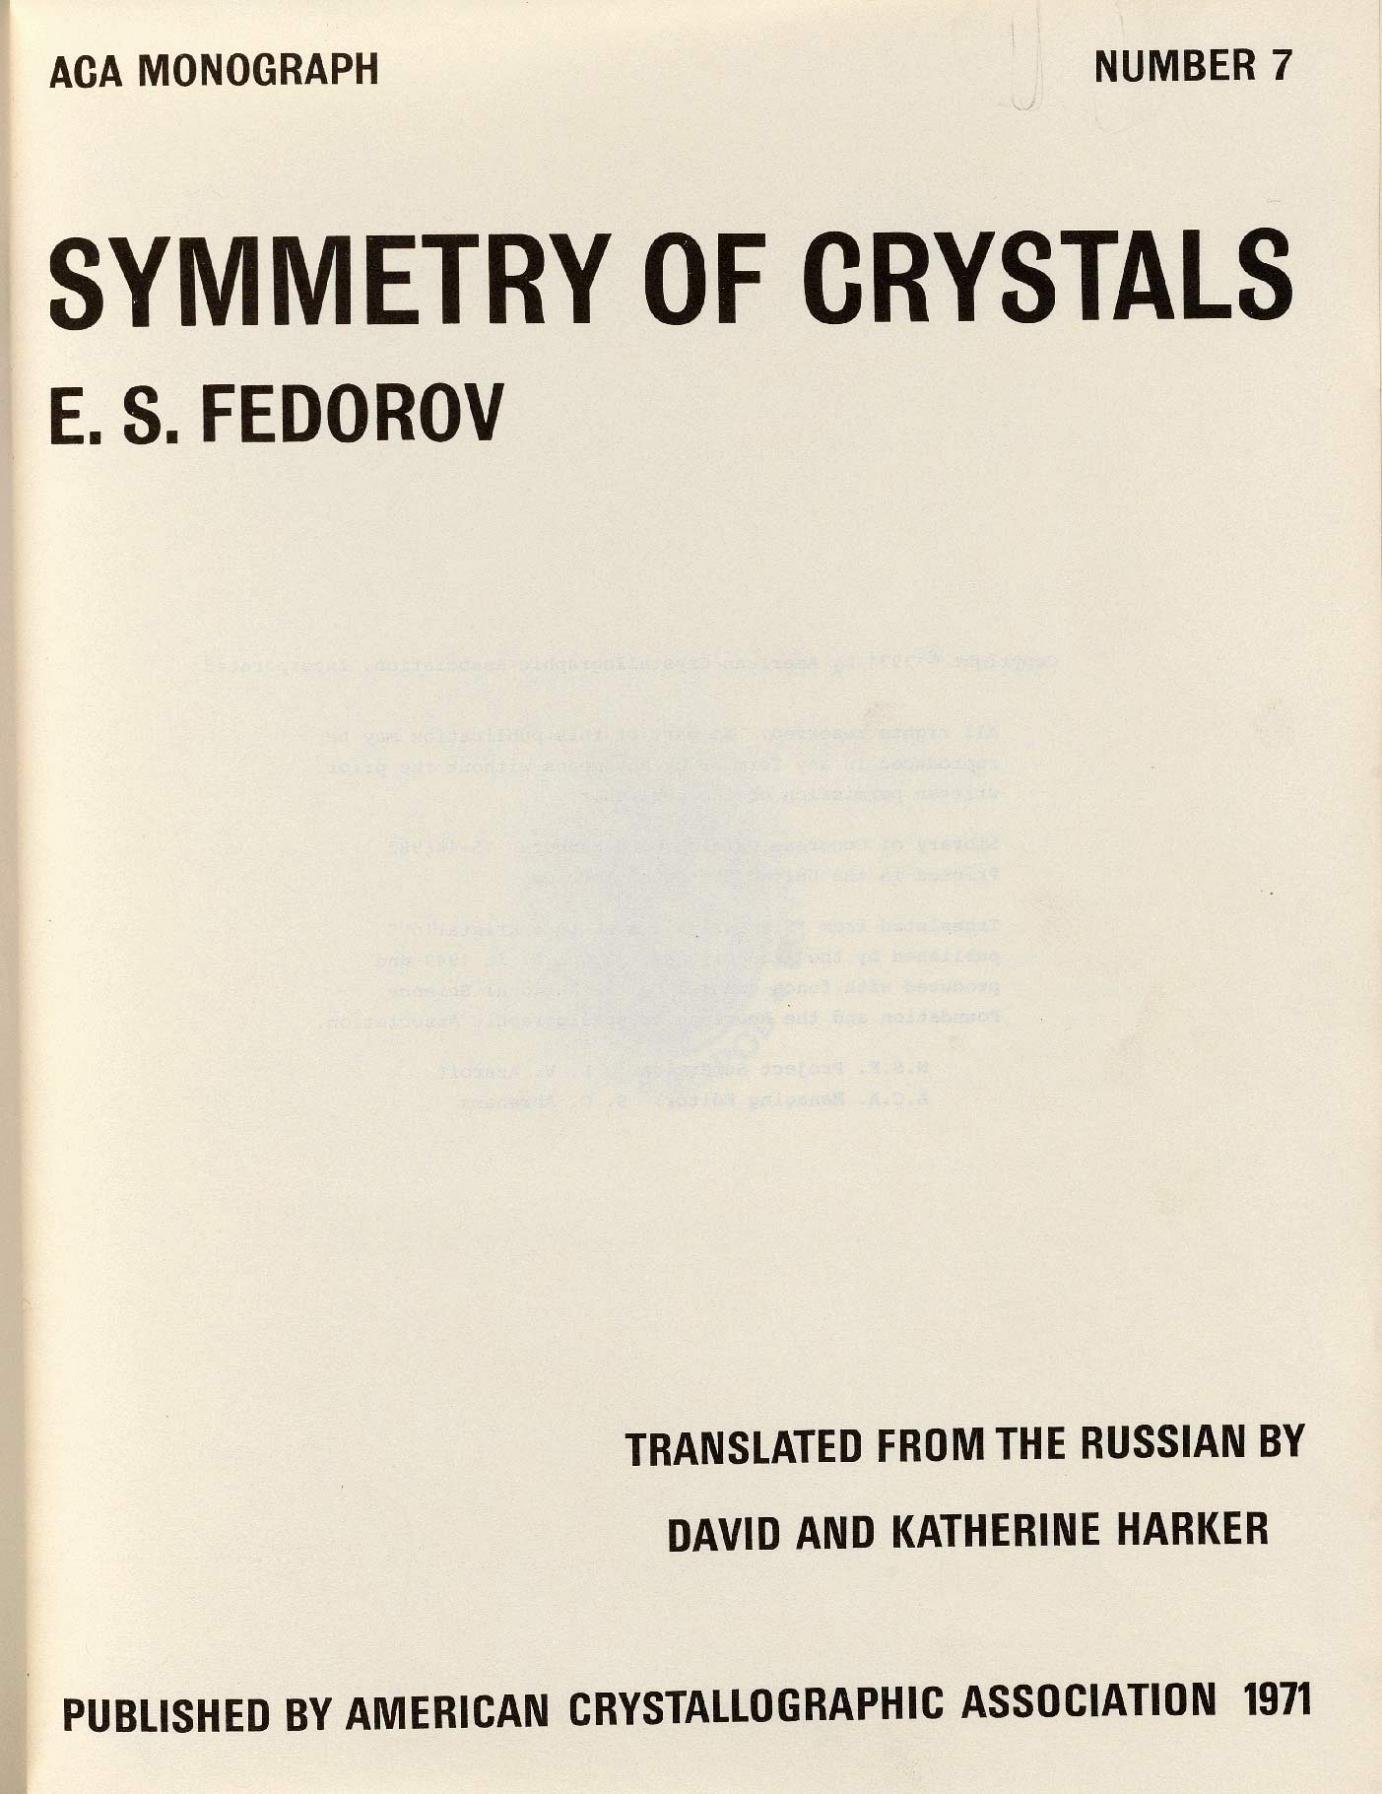 Title page of Fedorov article